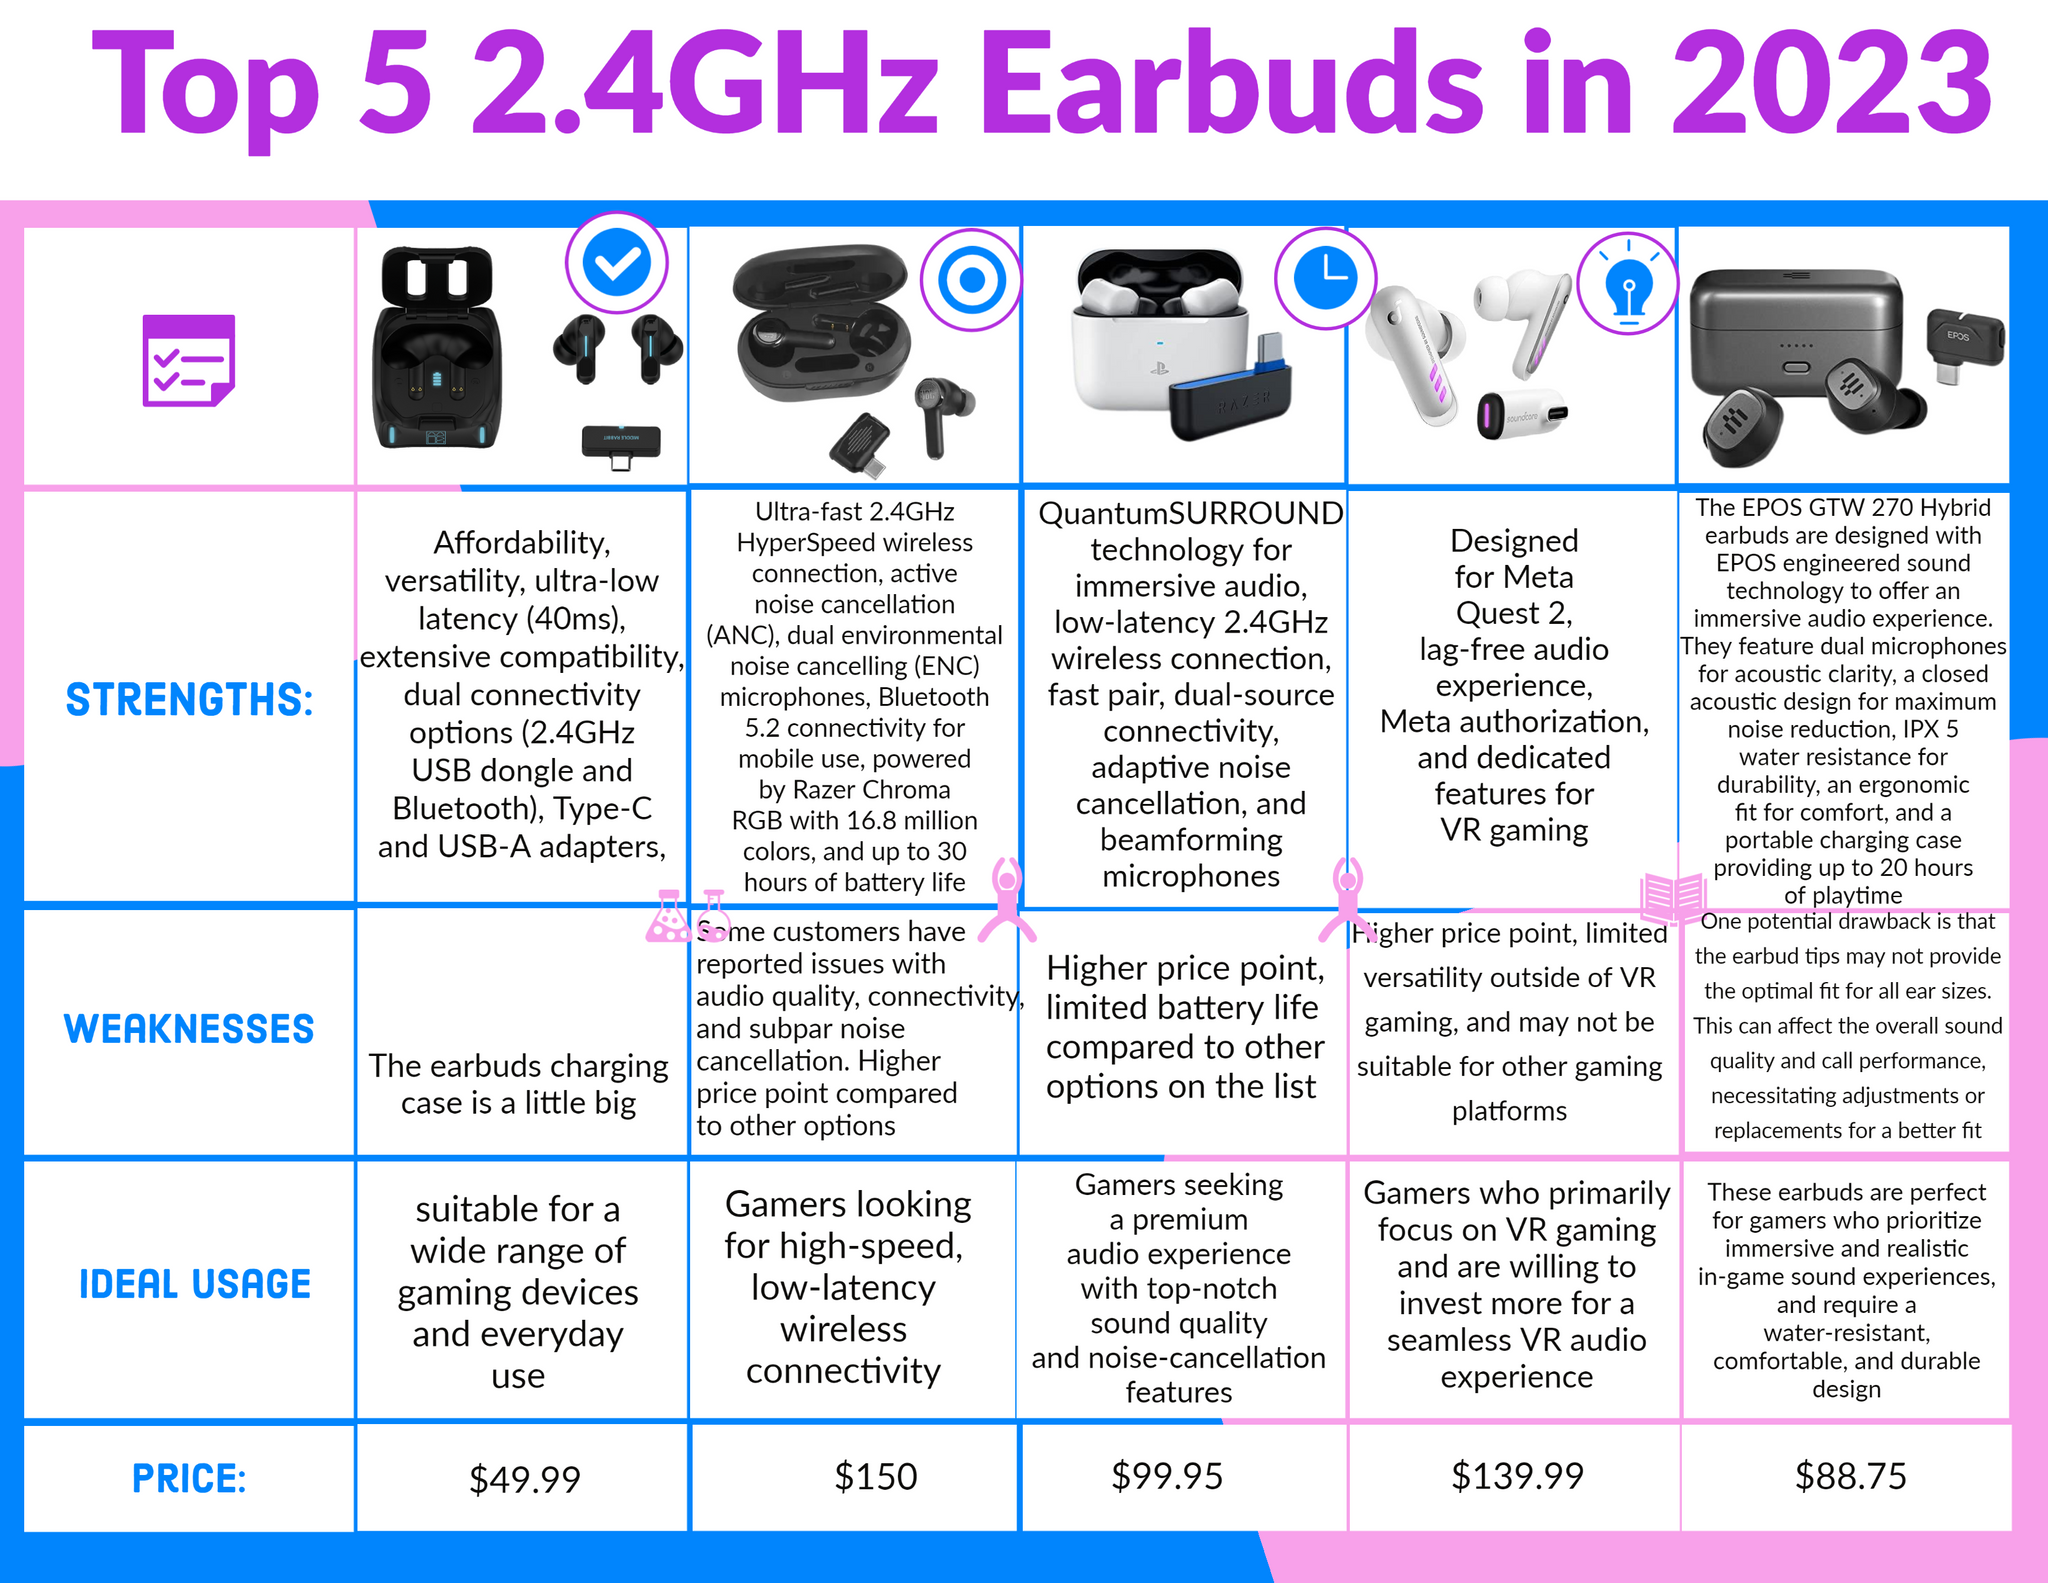 Top 5 2.4GHz Earbuds in 2023